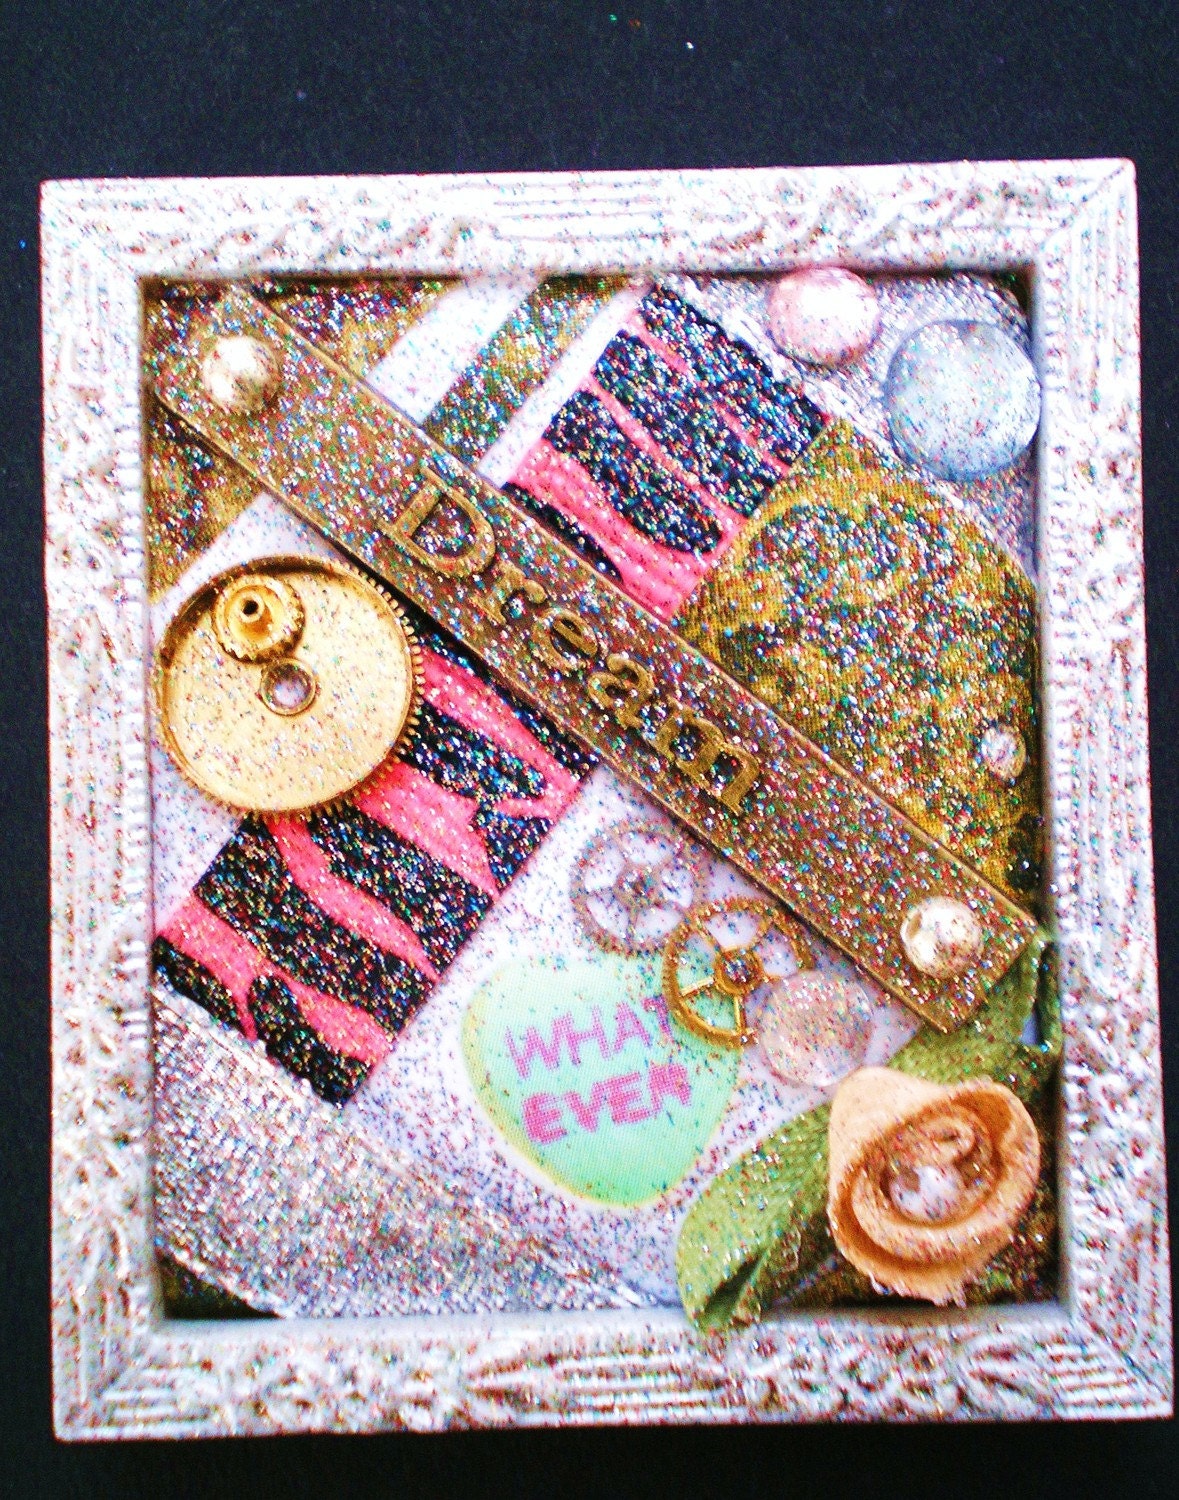 INSPIRATION - Tiny Collage Mixed Media OOAK Framed Signed Sarcastic Inspirational Message with Jewels Flower Heart Ribbon Watch Parts Beads